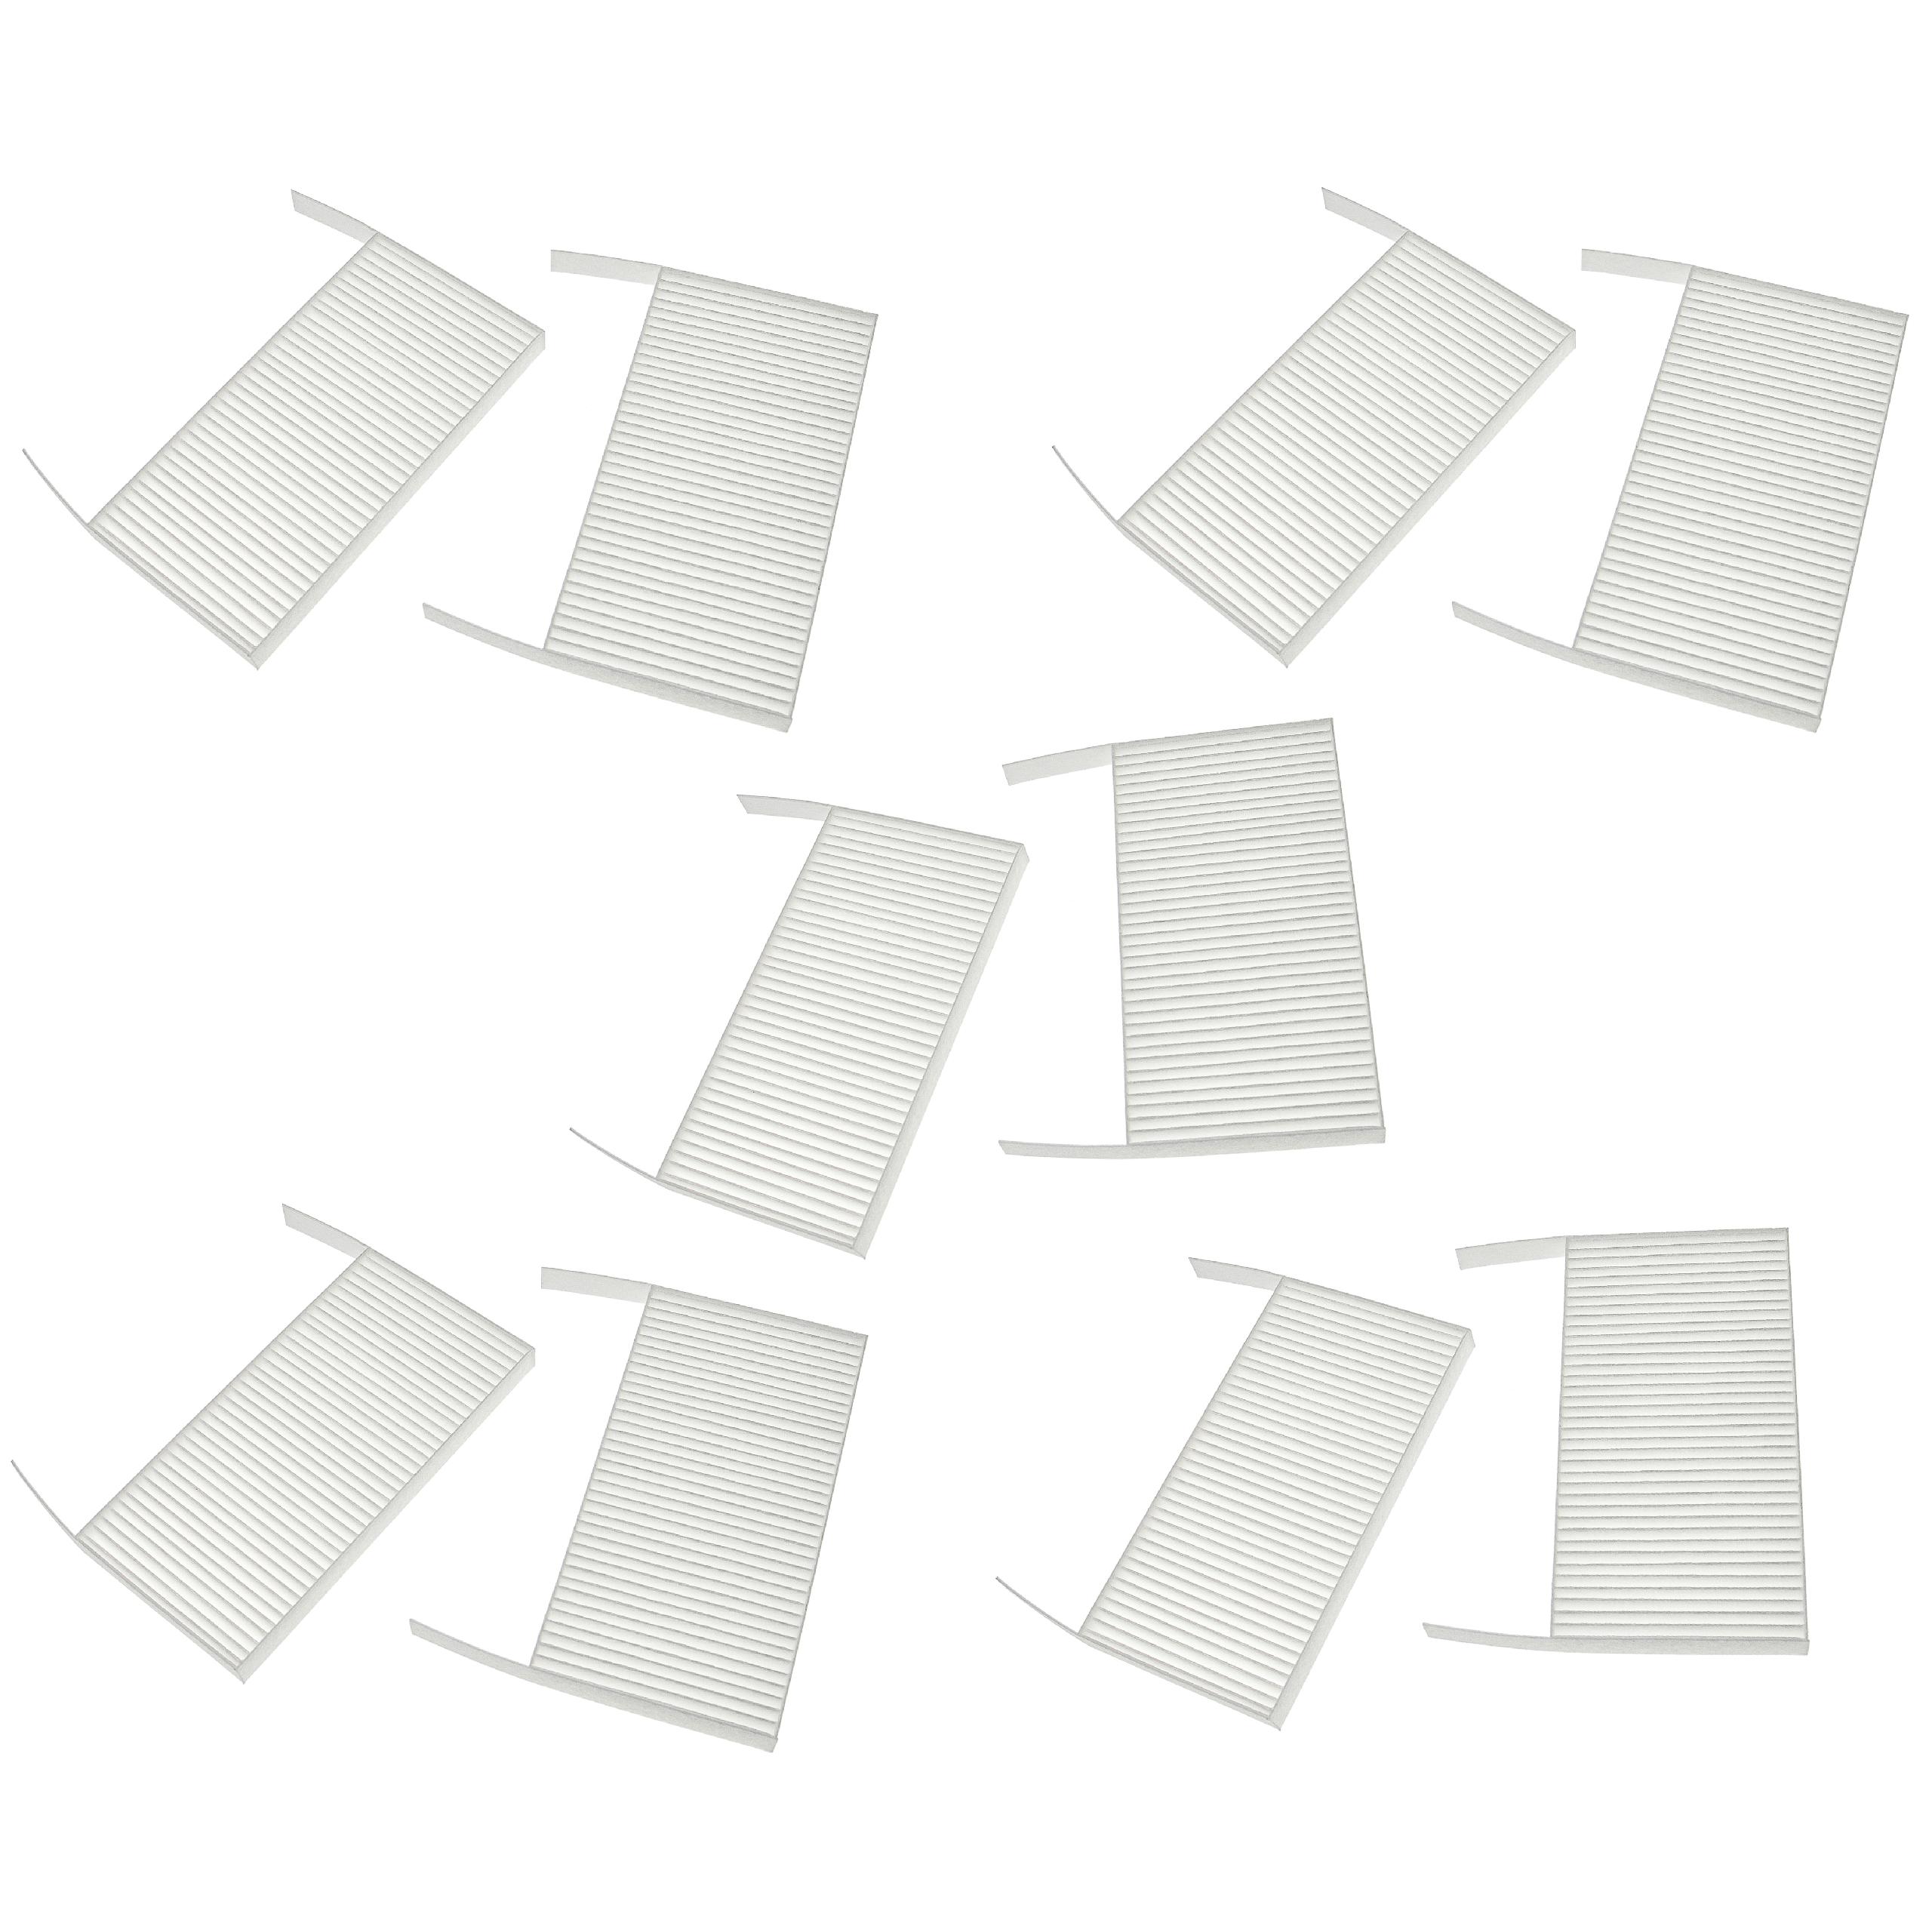 Air Filter Set Replacement for Wernig EFS CA 70 G4, 527005190 for Ventilation Devices - G4 / F7